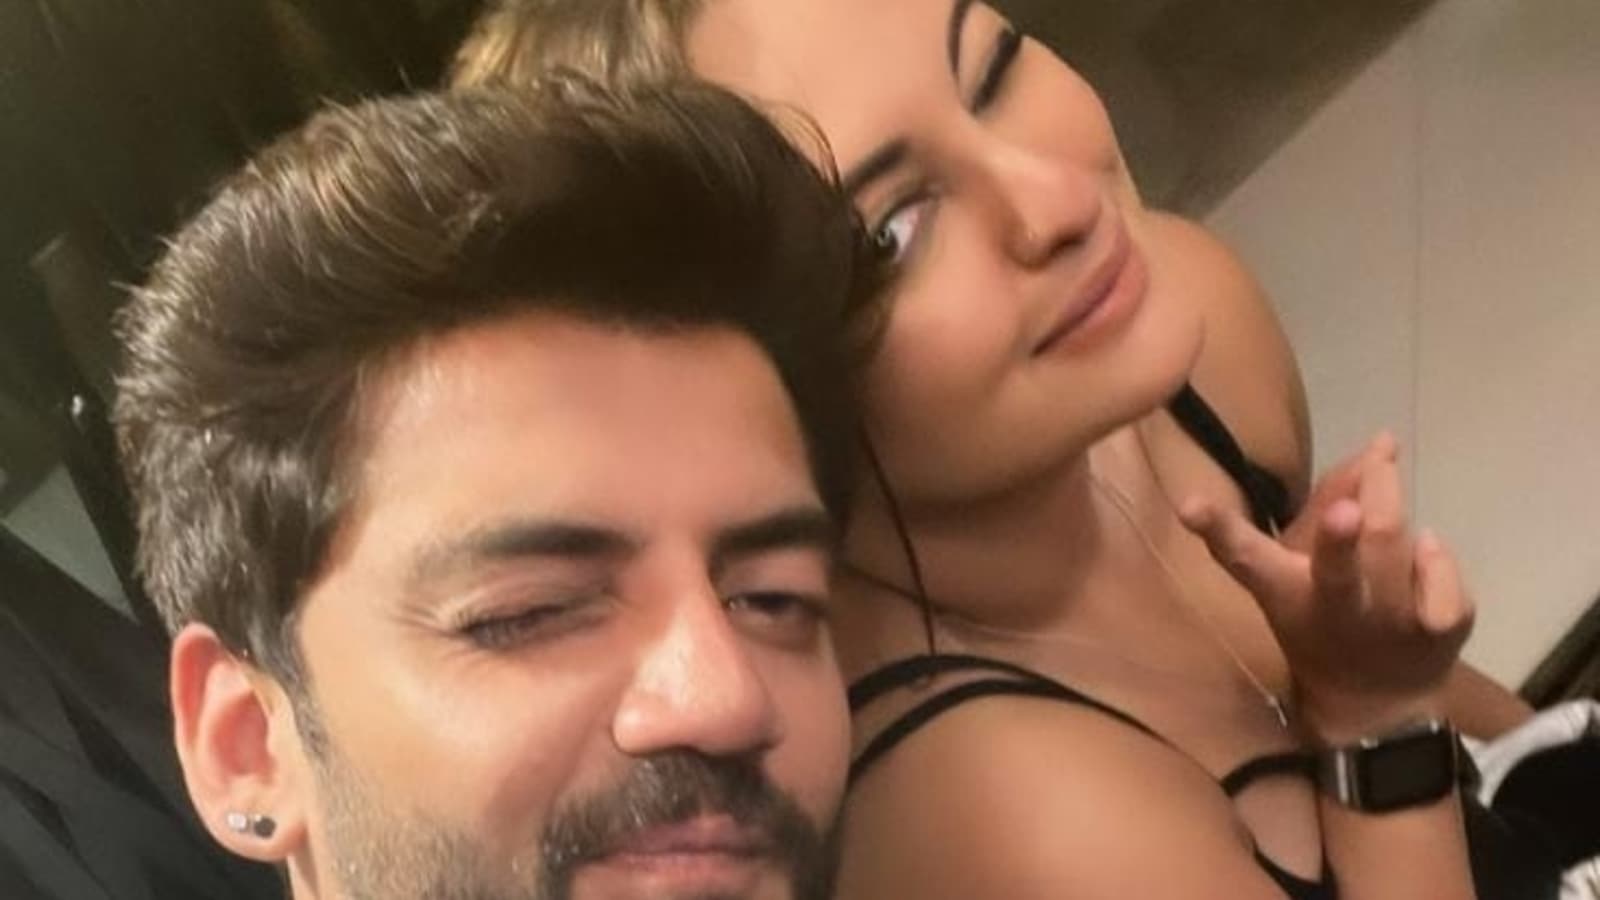 Bollyyood Porn Videos Sonaxi Sinha - Sonakshi Sinha winks, flashes victory sign as she poses with rumoured  boyfriend Zaheer Iqbal in new pic | Bollywood - Hindustan Times